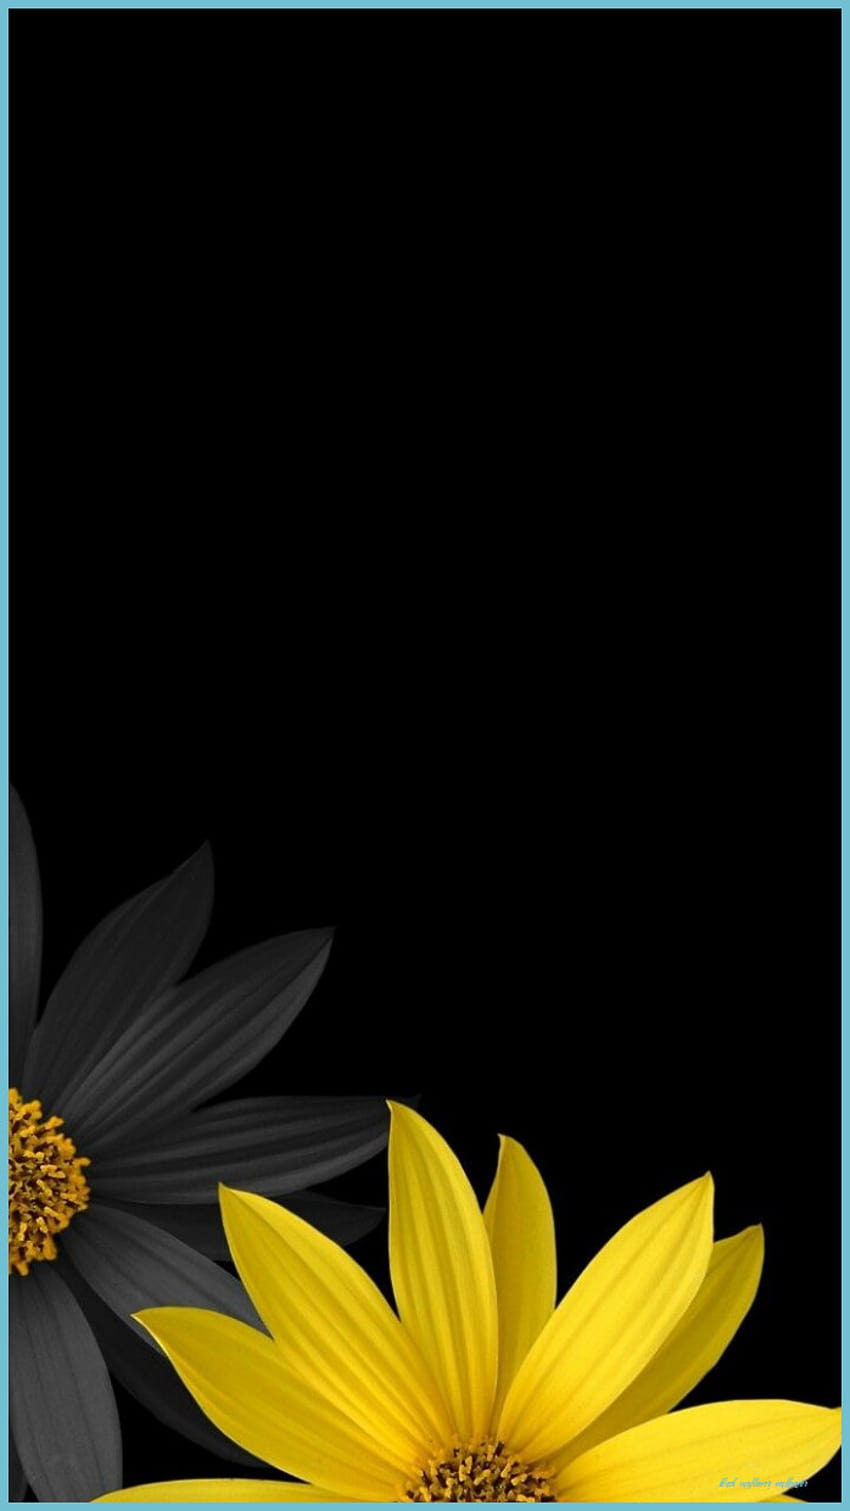 40+ Joyful Sunflower Wallpapers for iPhone - The Mood Guide